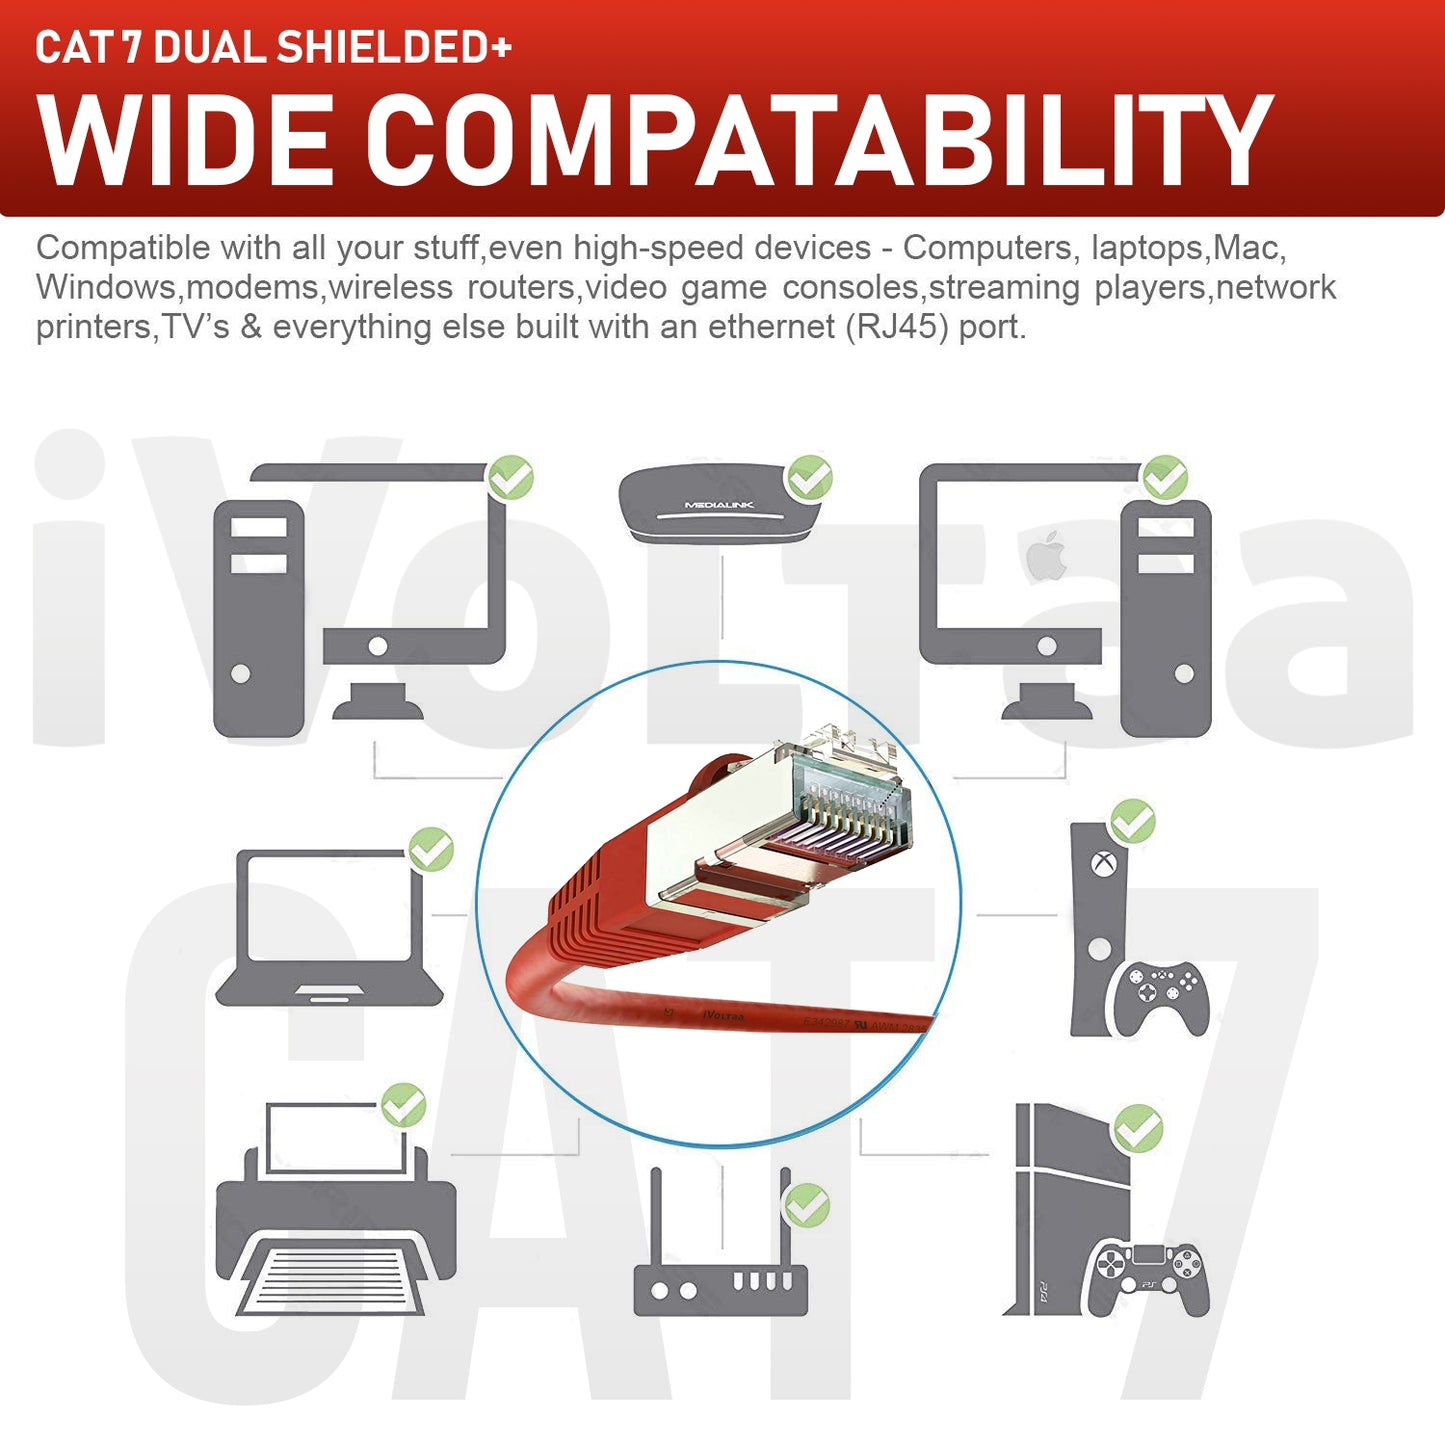 Compatible with computers, tablets, modems, routers, gaming consoles and everything with RJ45 ports.